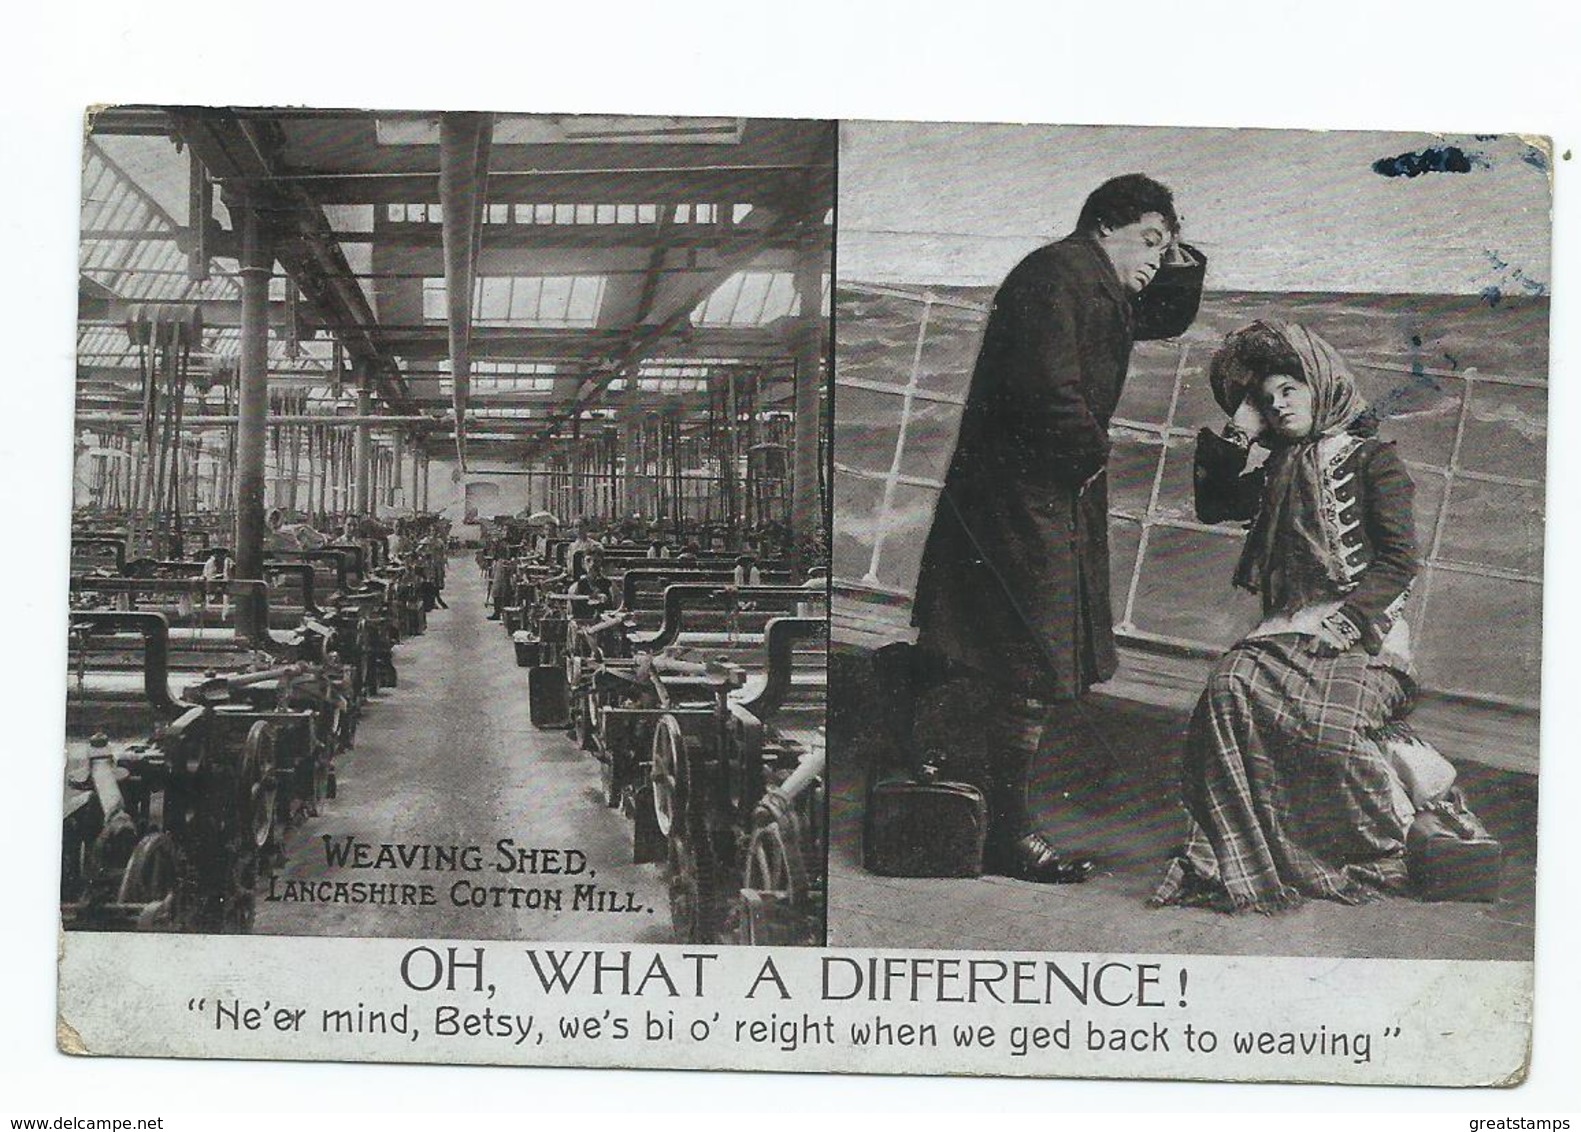 Postcard Weaving Shed Lancashire Cotton Mills Humour Postcard Oh What A Difference Posted1910 - Industrial